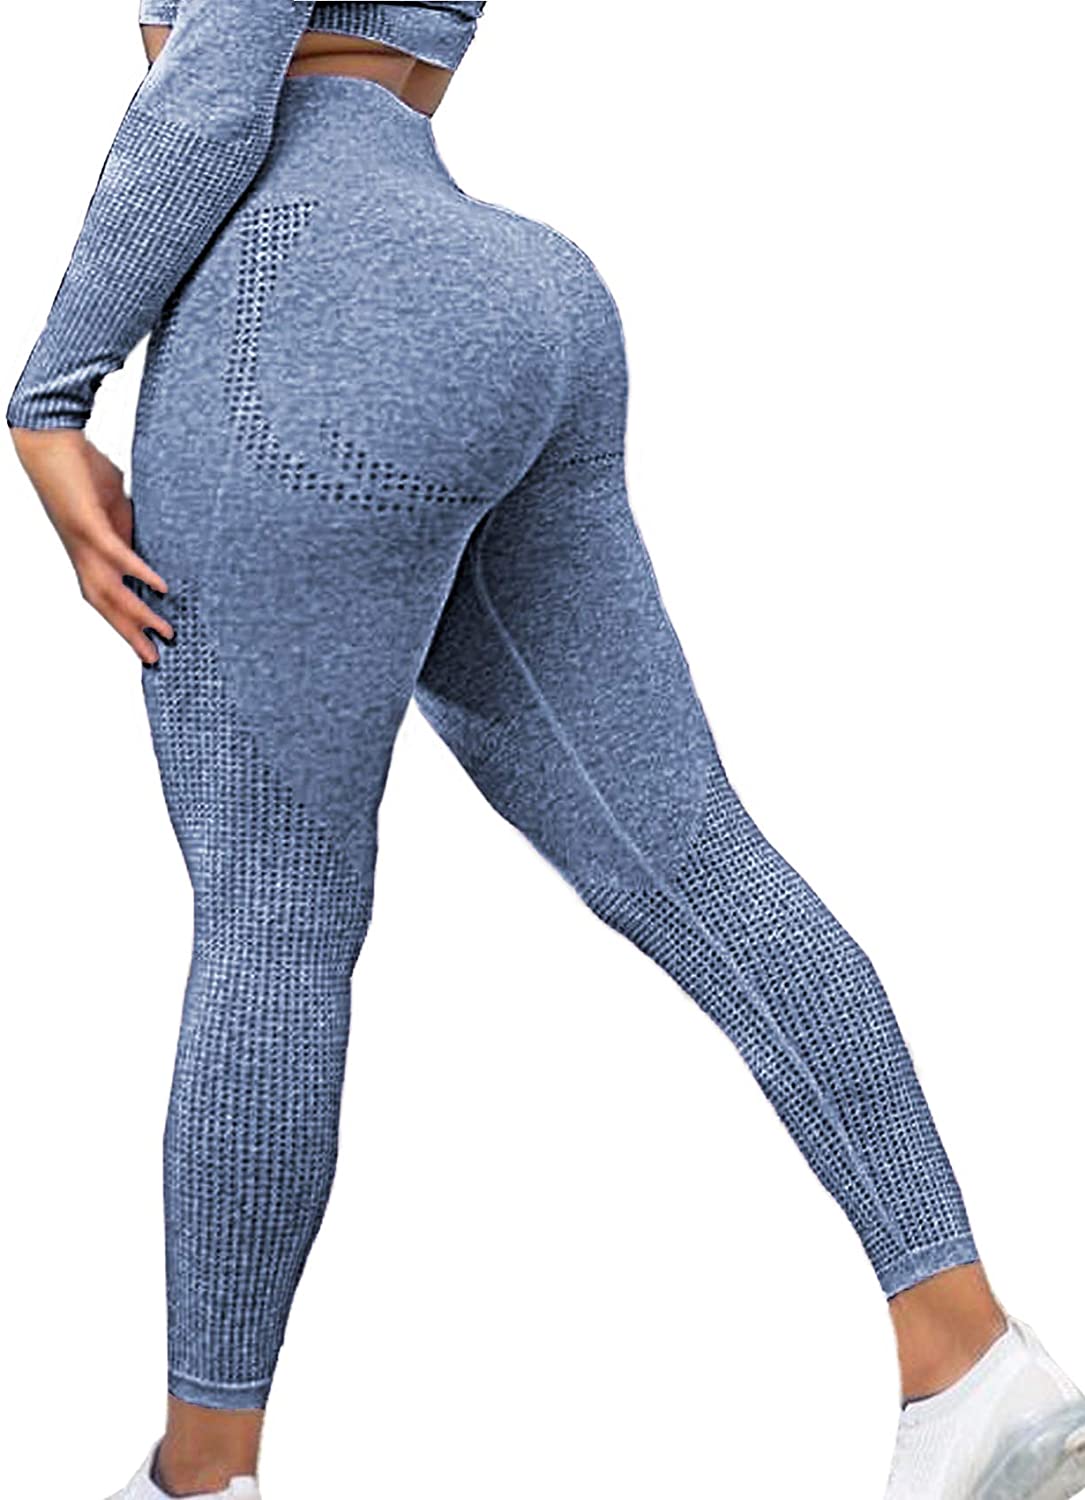 Buy Seasum Womens Ribbed Yoga Active Leggings - High Waist Workout Butt  Push Up Pants Sports Textured Stretchy Tights online